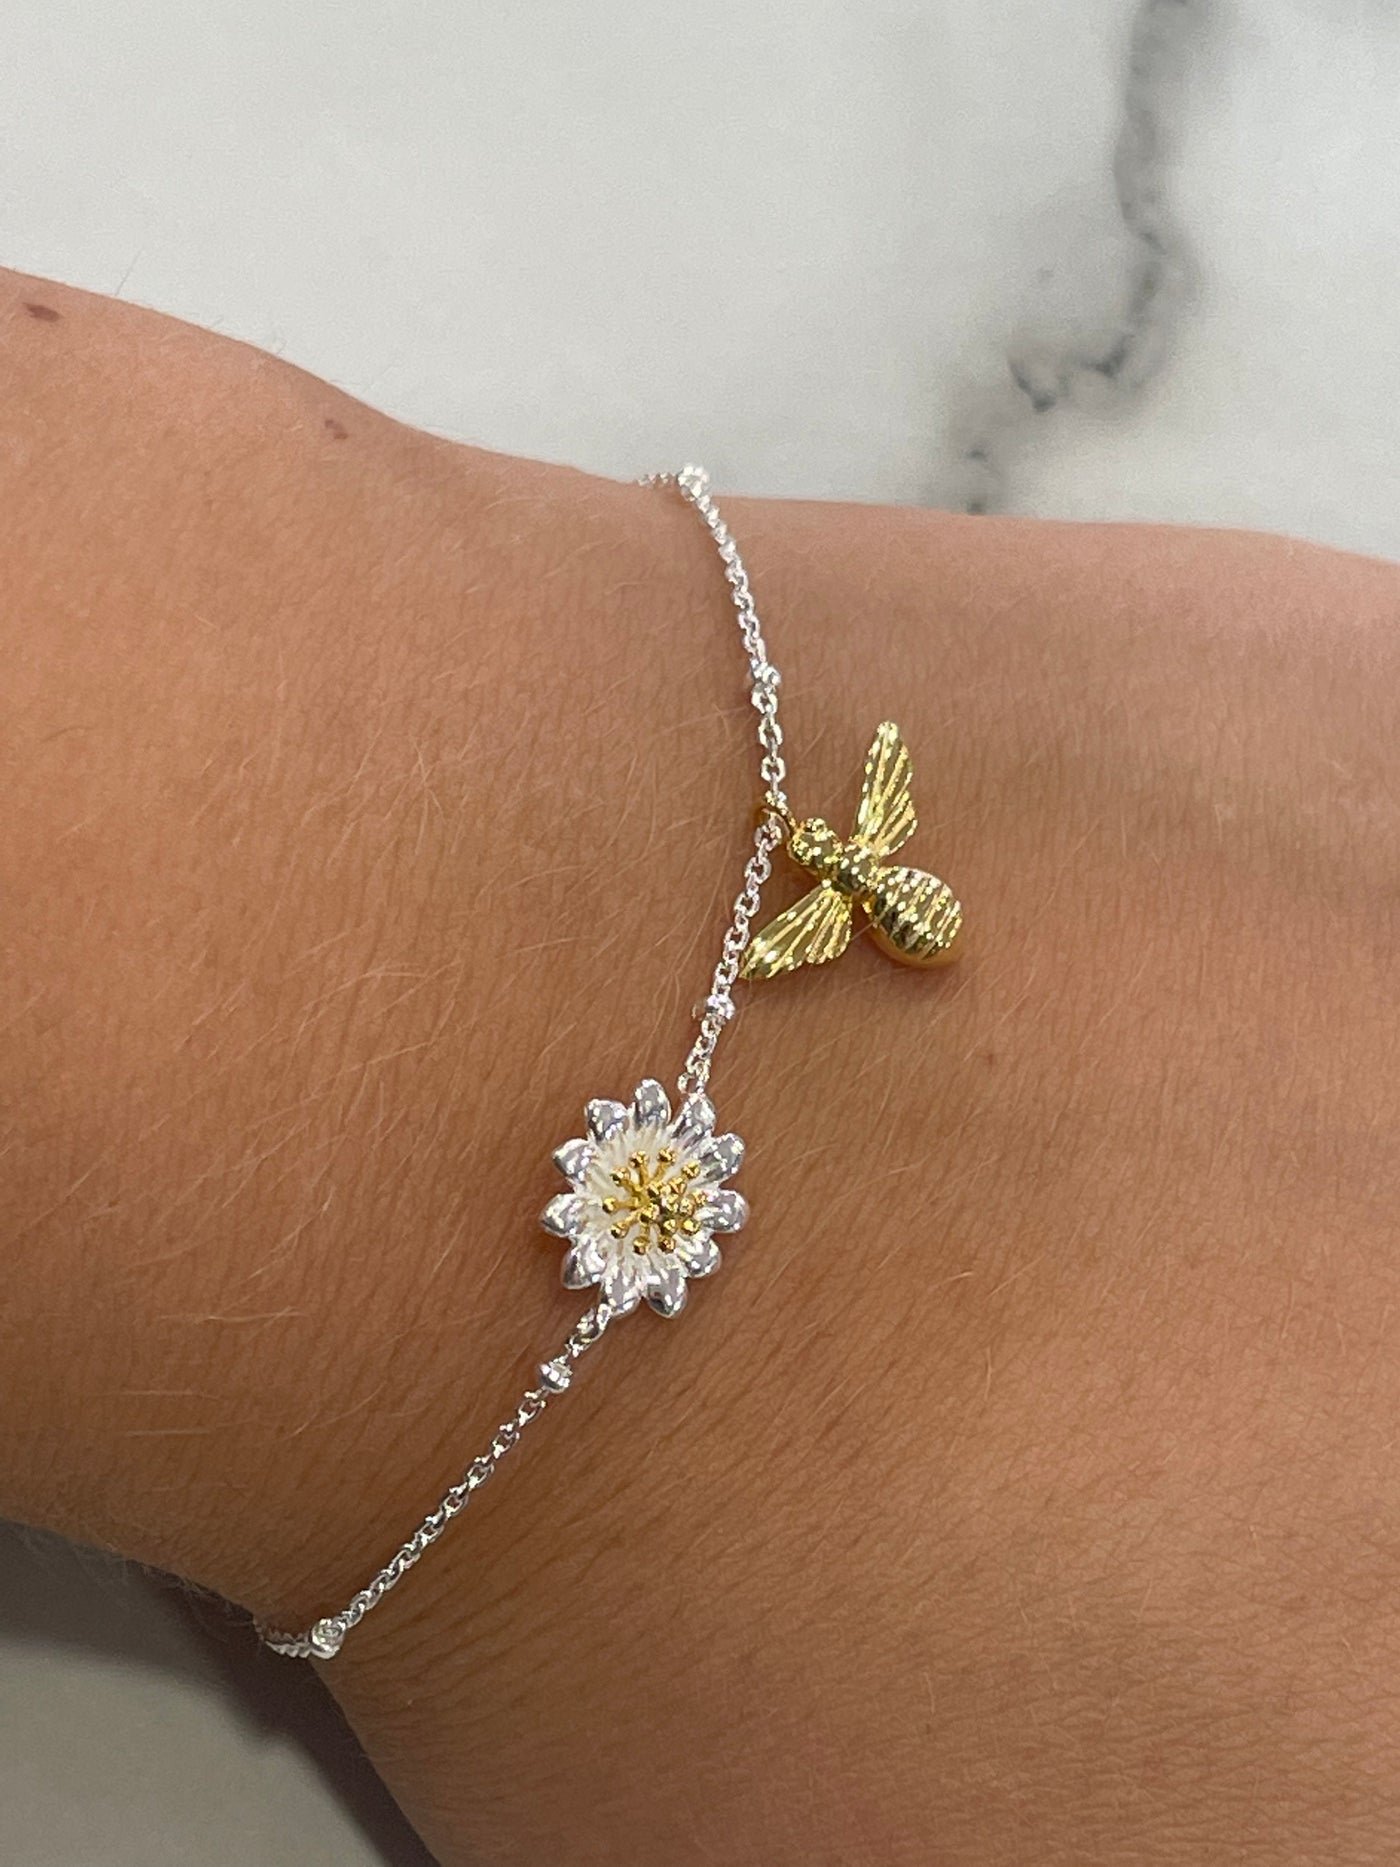 Two-Tone Bumblebee and Daisy Ball Chain Bracelet - Rococo Jewellery